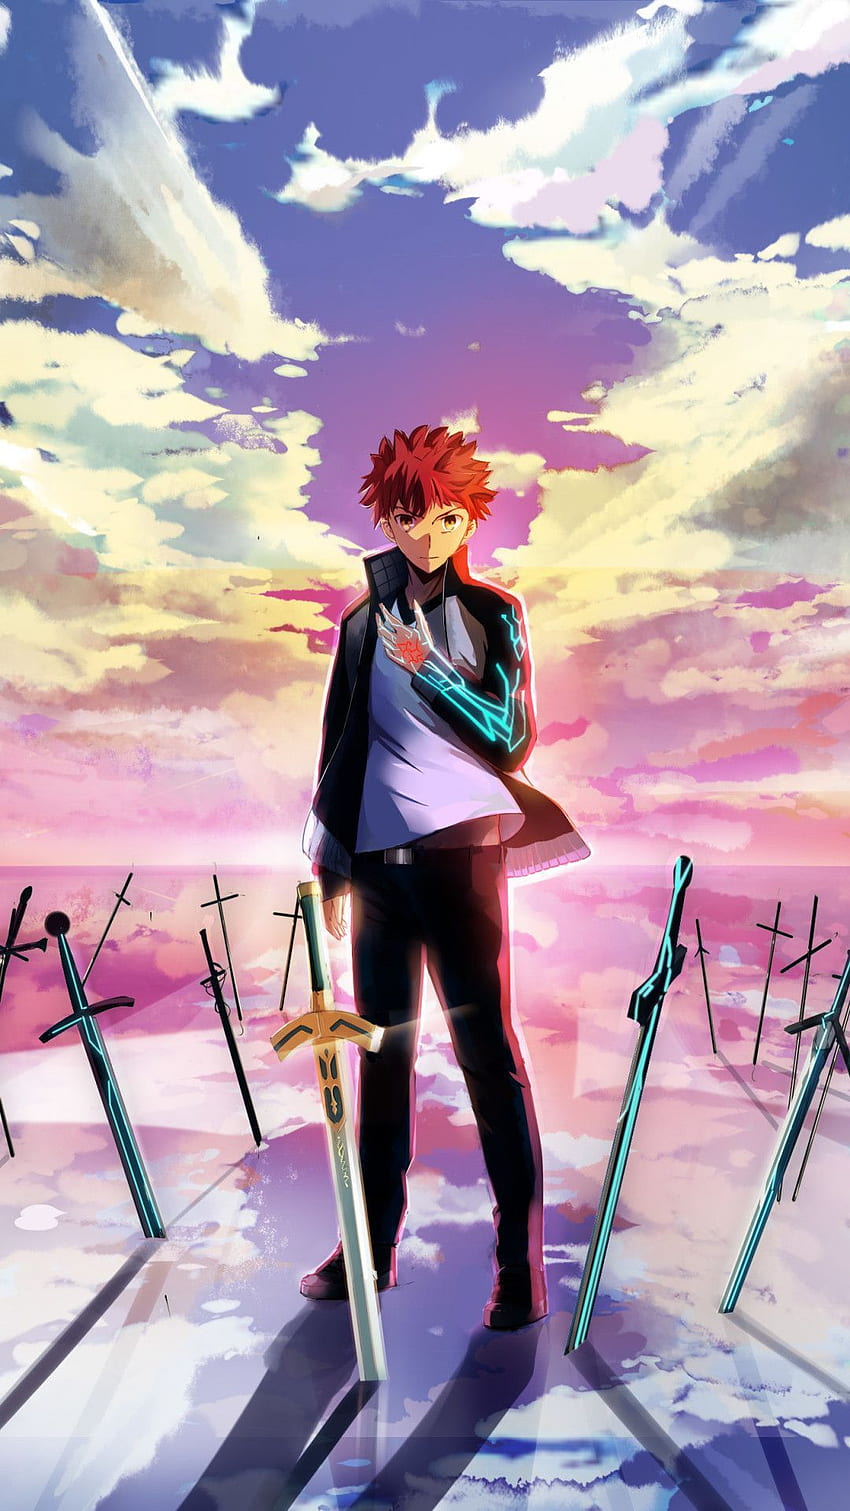 Fatestay night Unlimited Blade Works TV  Anime News Network